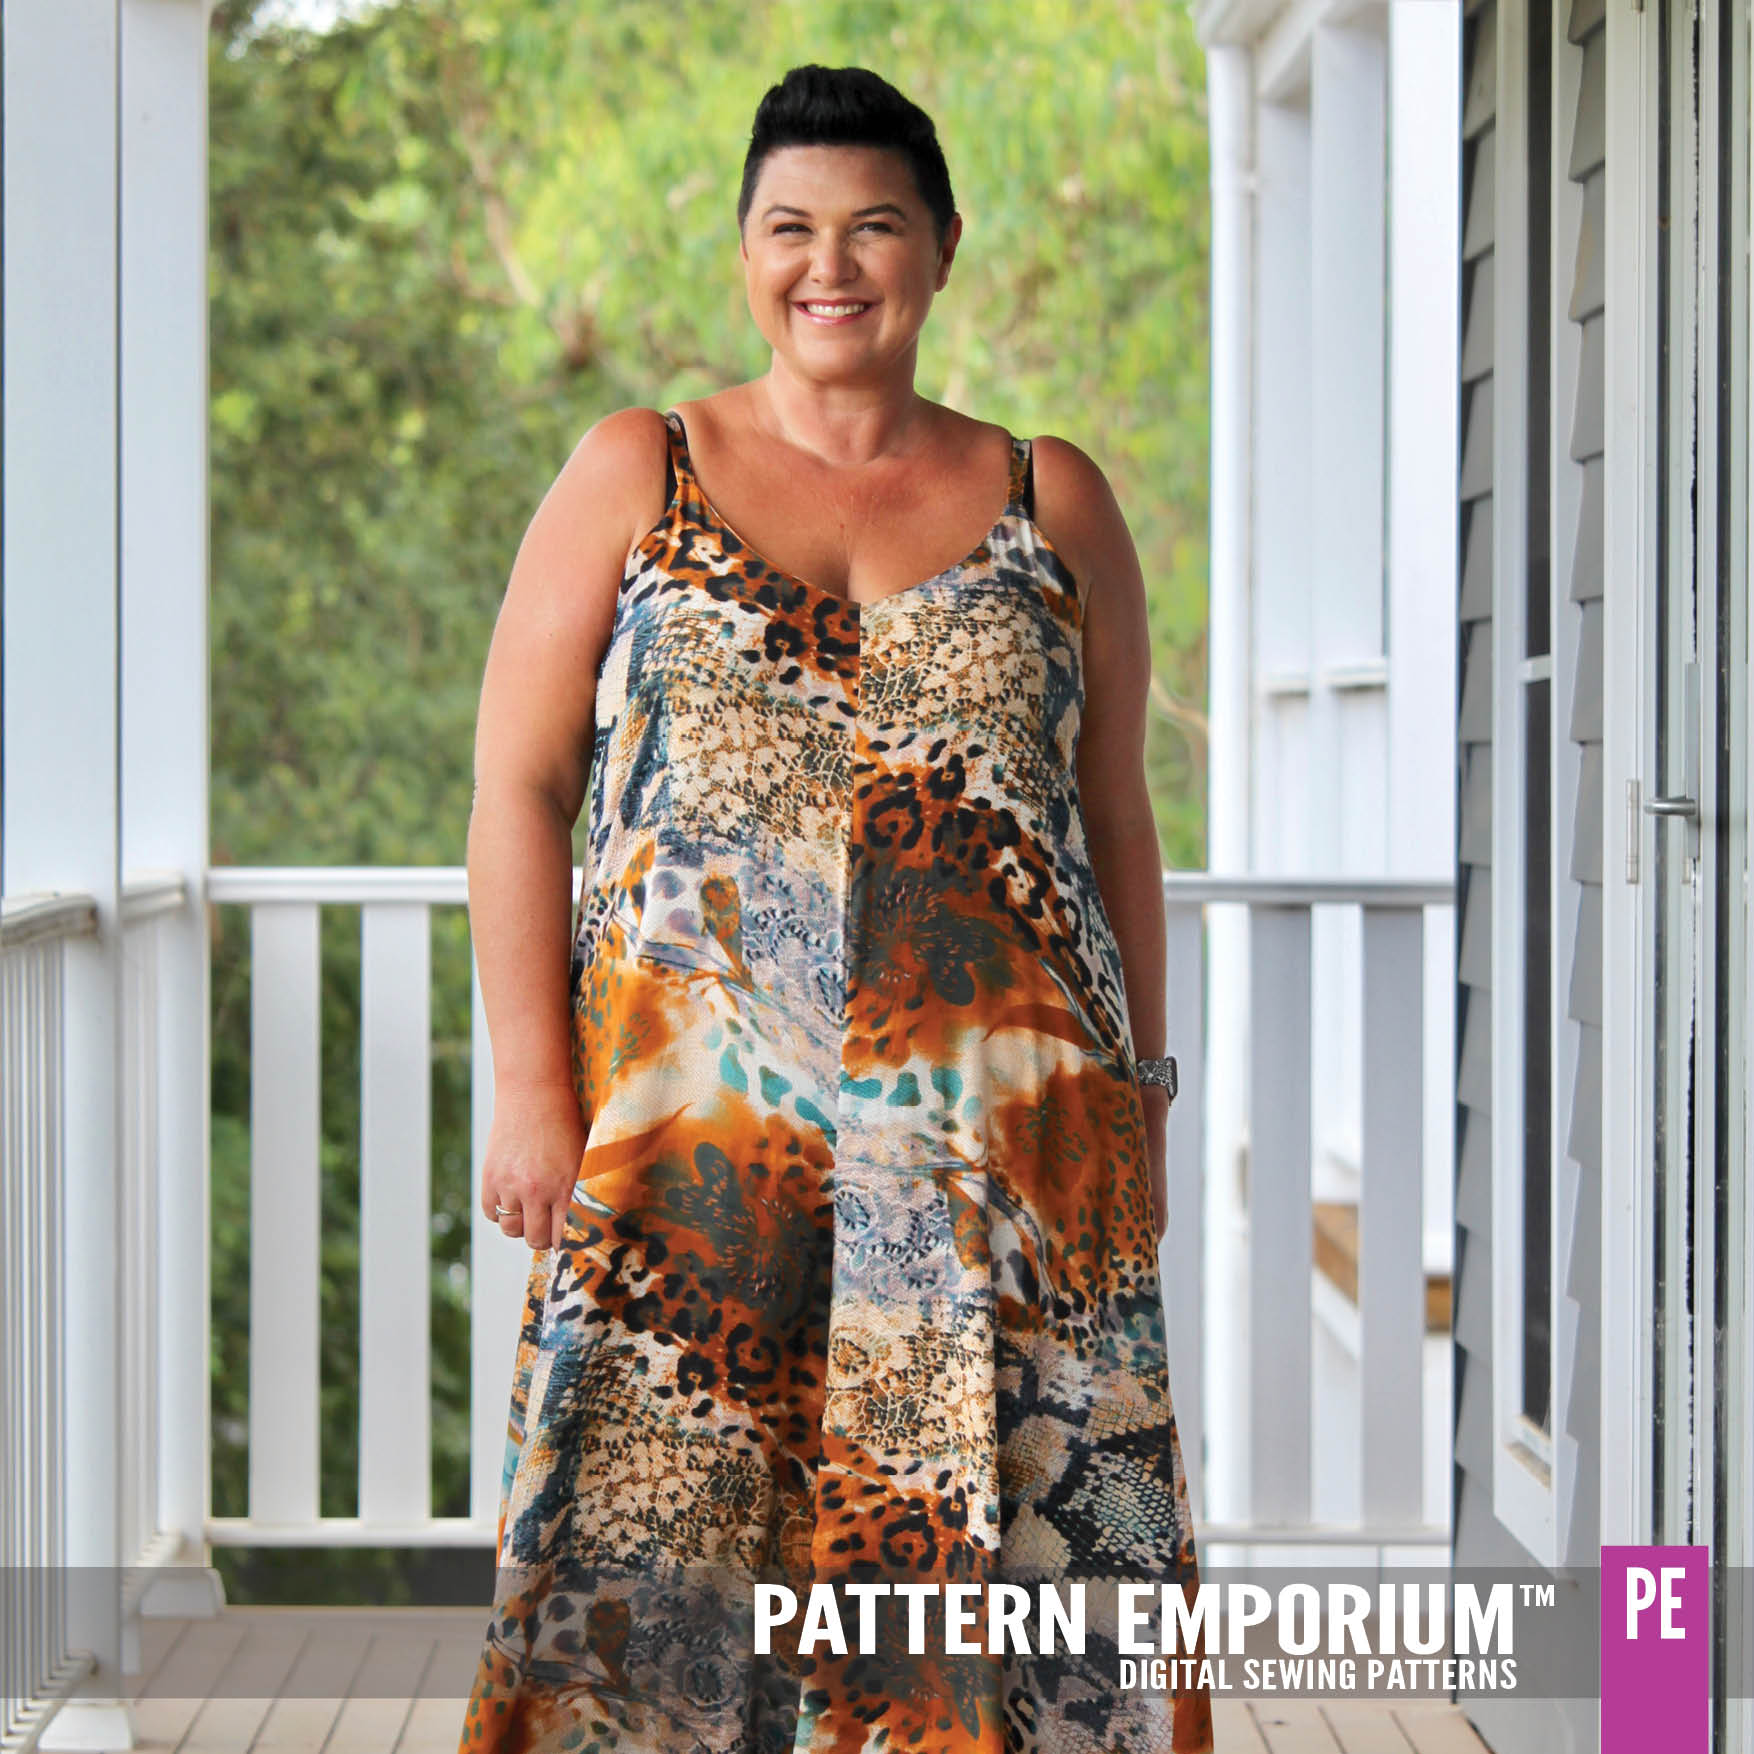 Best Selling Sewing Patterns